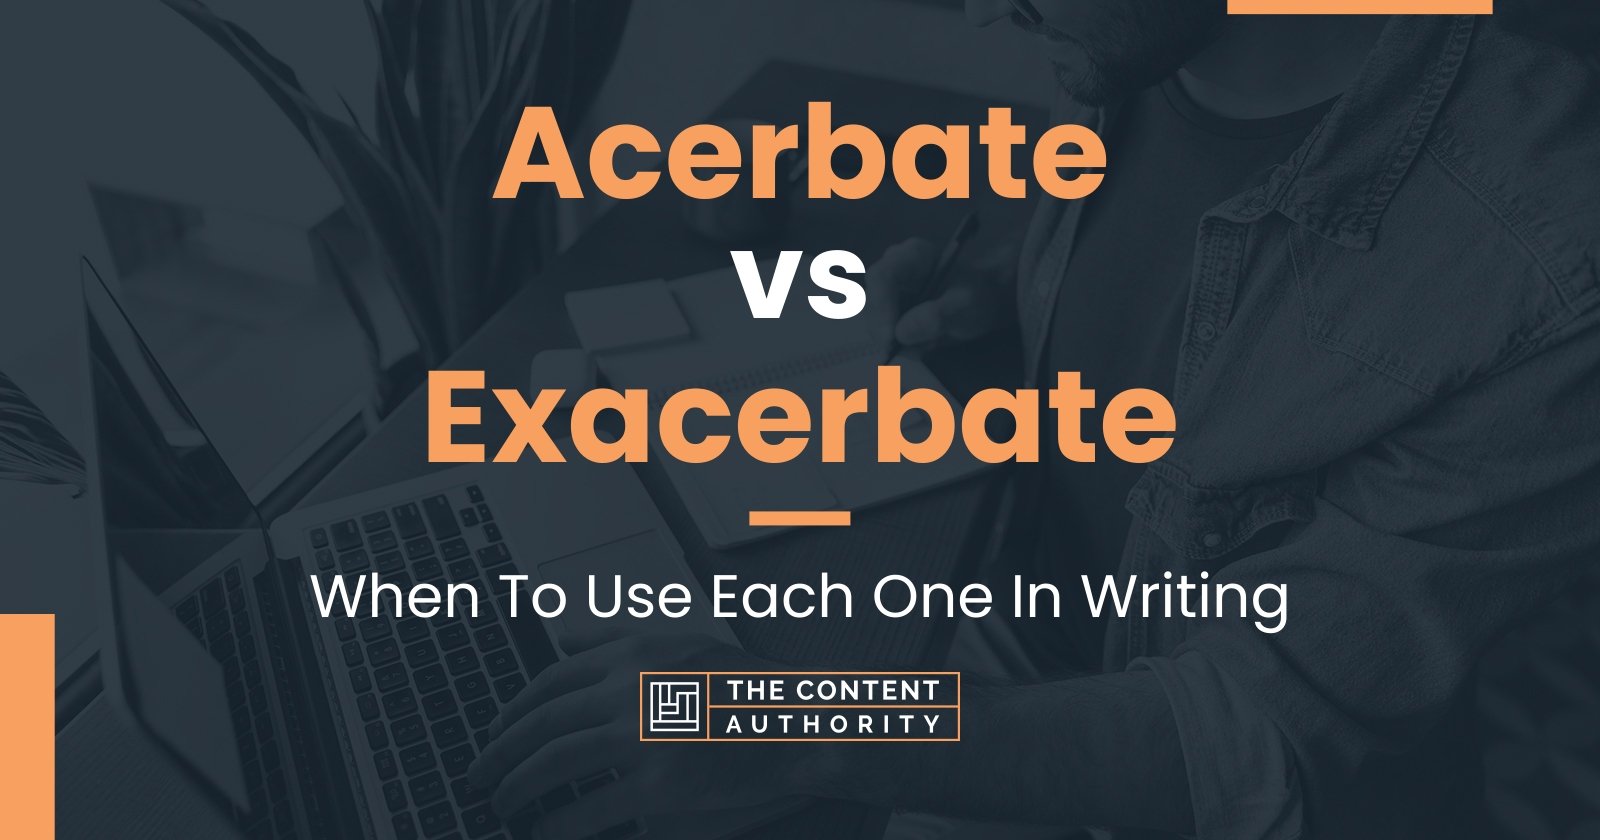 Acerbate vs Exacerbate: When To Use Each One In Writing